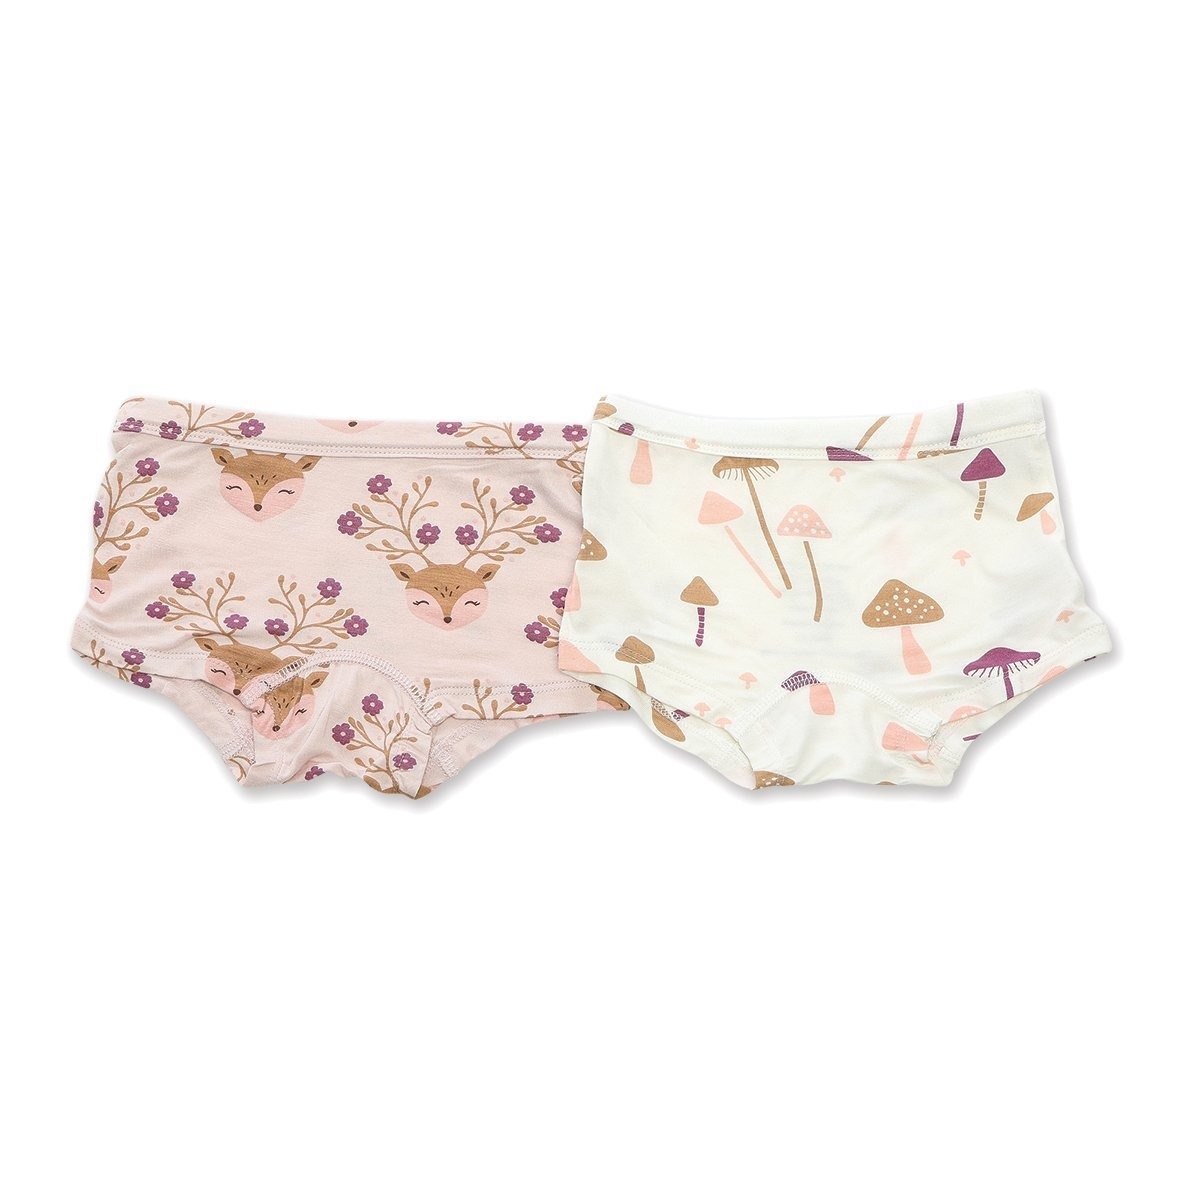 Bamboo Girls' Boy Shorts 2-Pack - Abby Sprouts Baby and Childrens